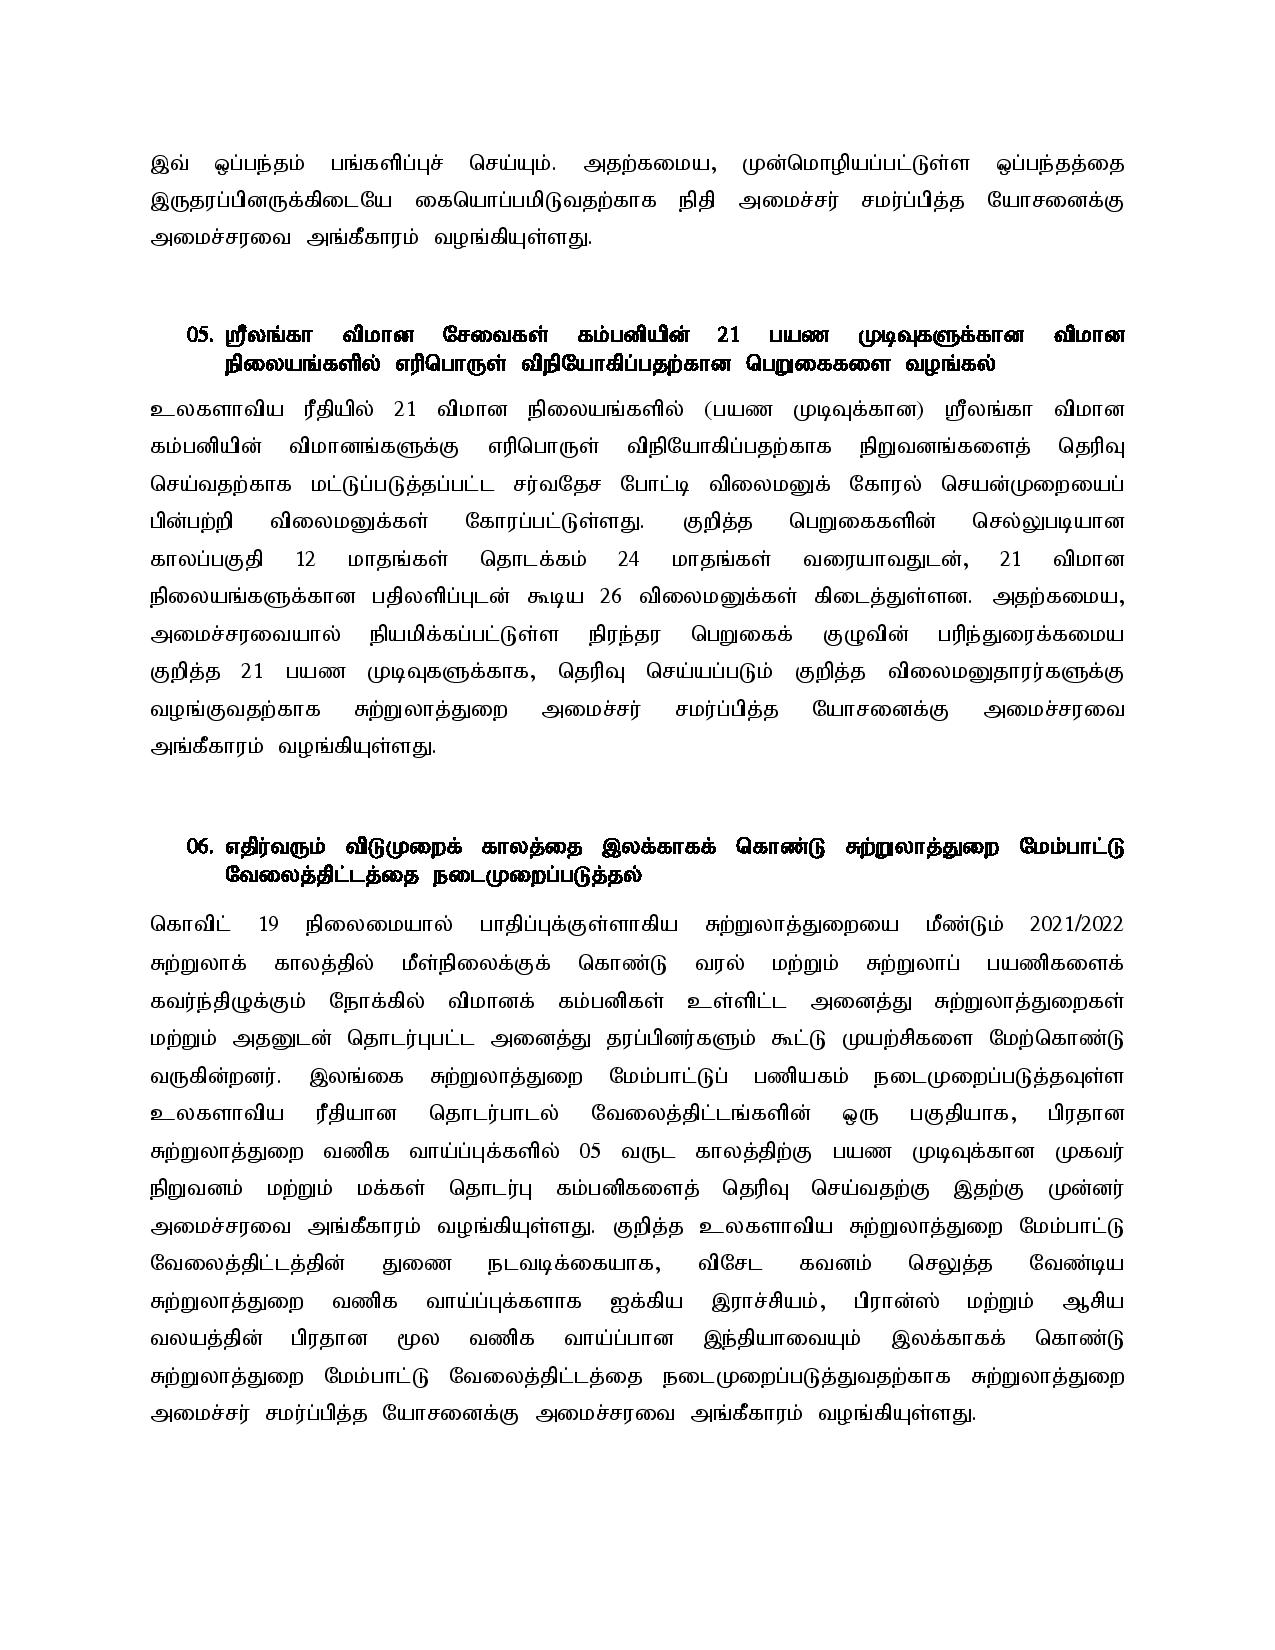 Cabinet Decision on 15.11.2021 Tamil page 003